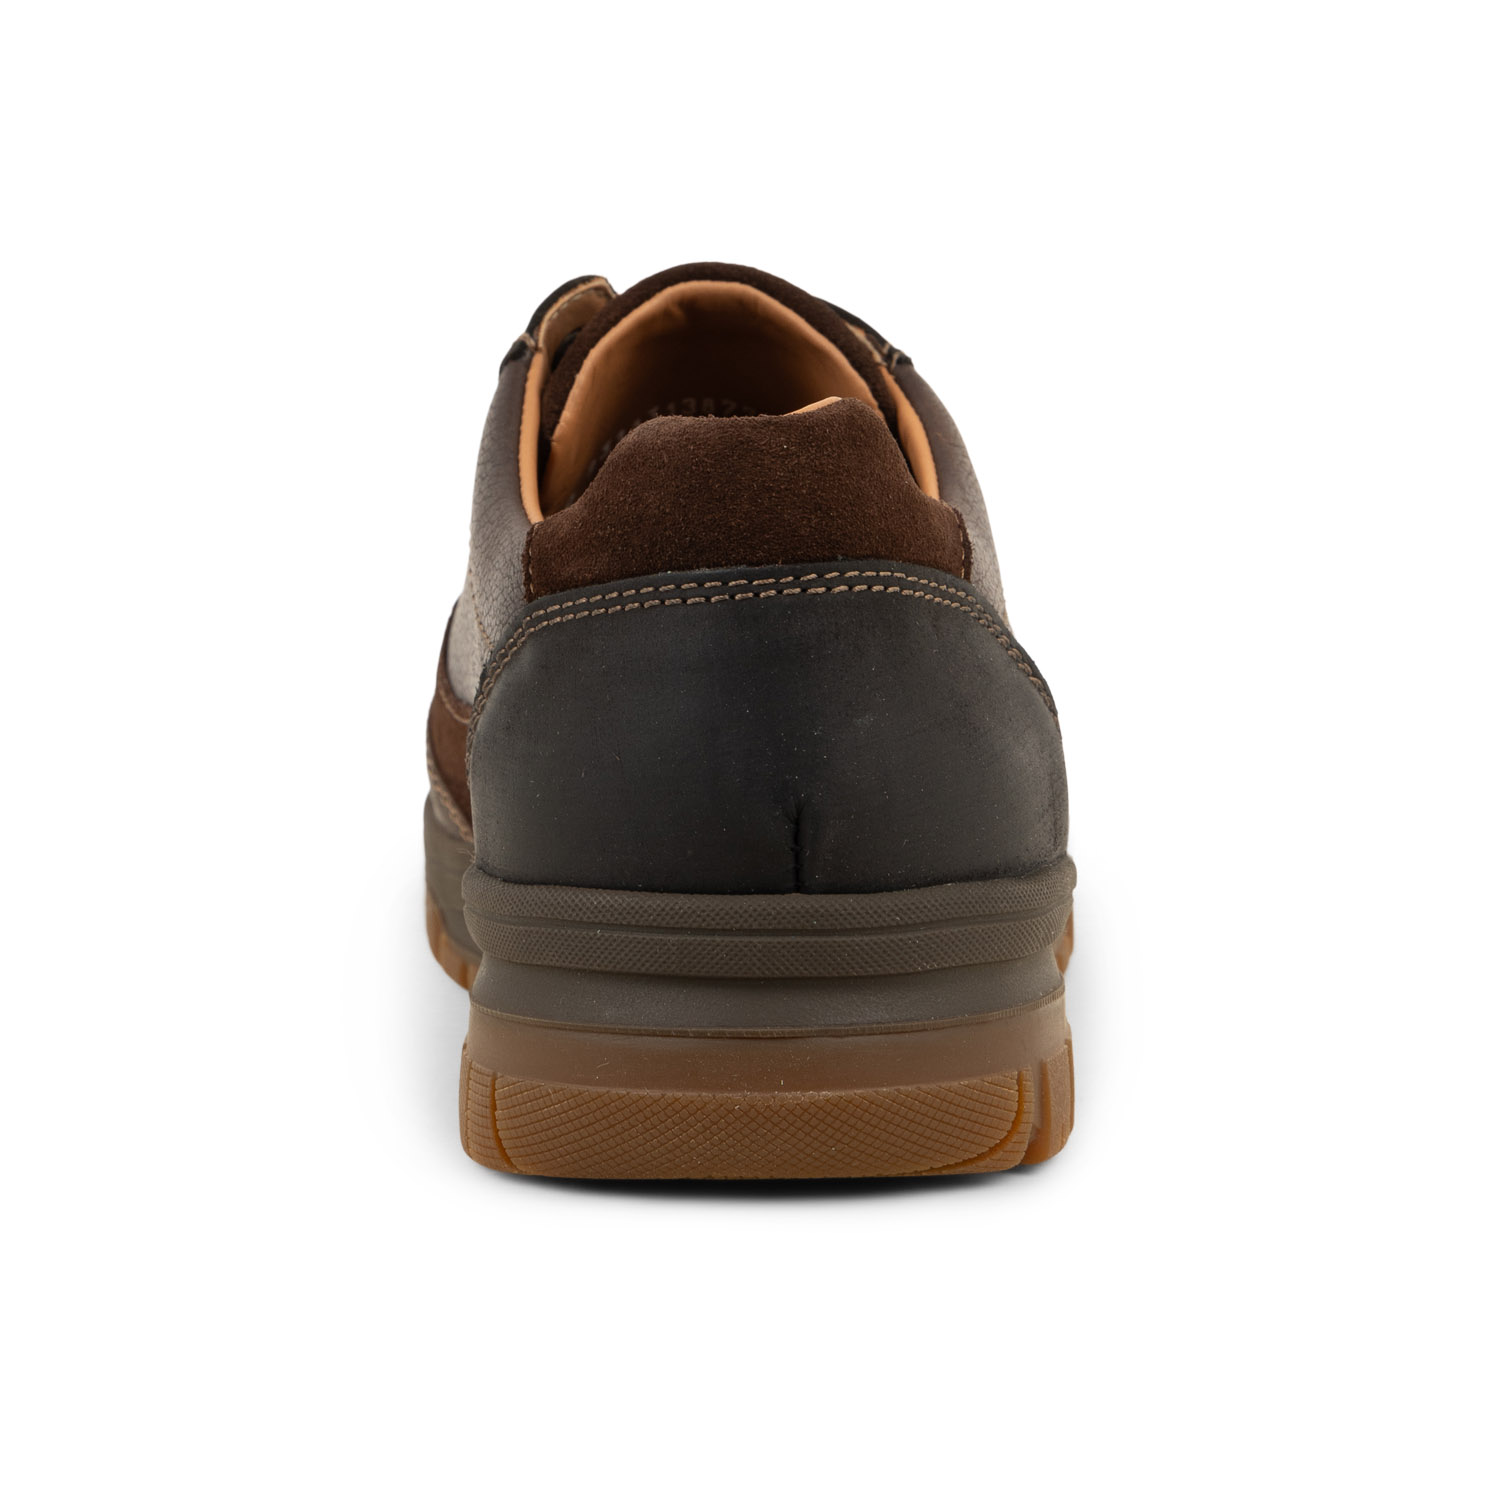 03 - PACO - MEPHISTO - Chaussures à lacets - Cuir